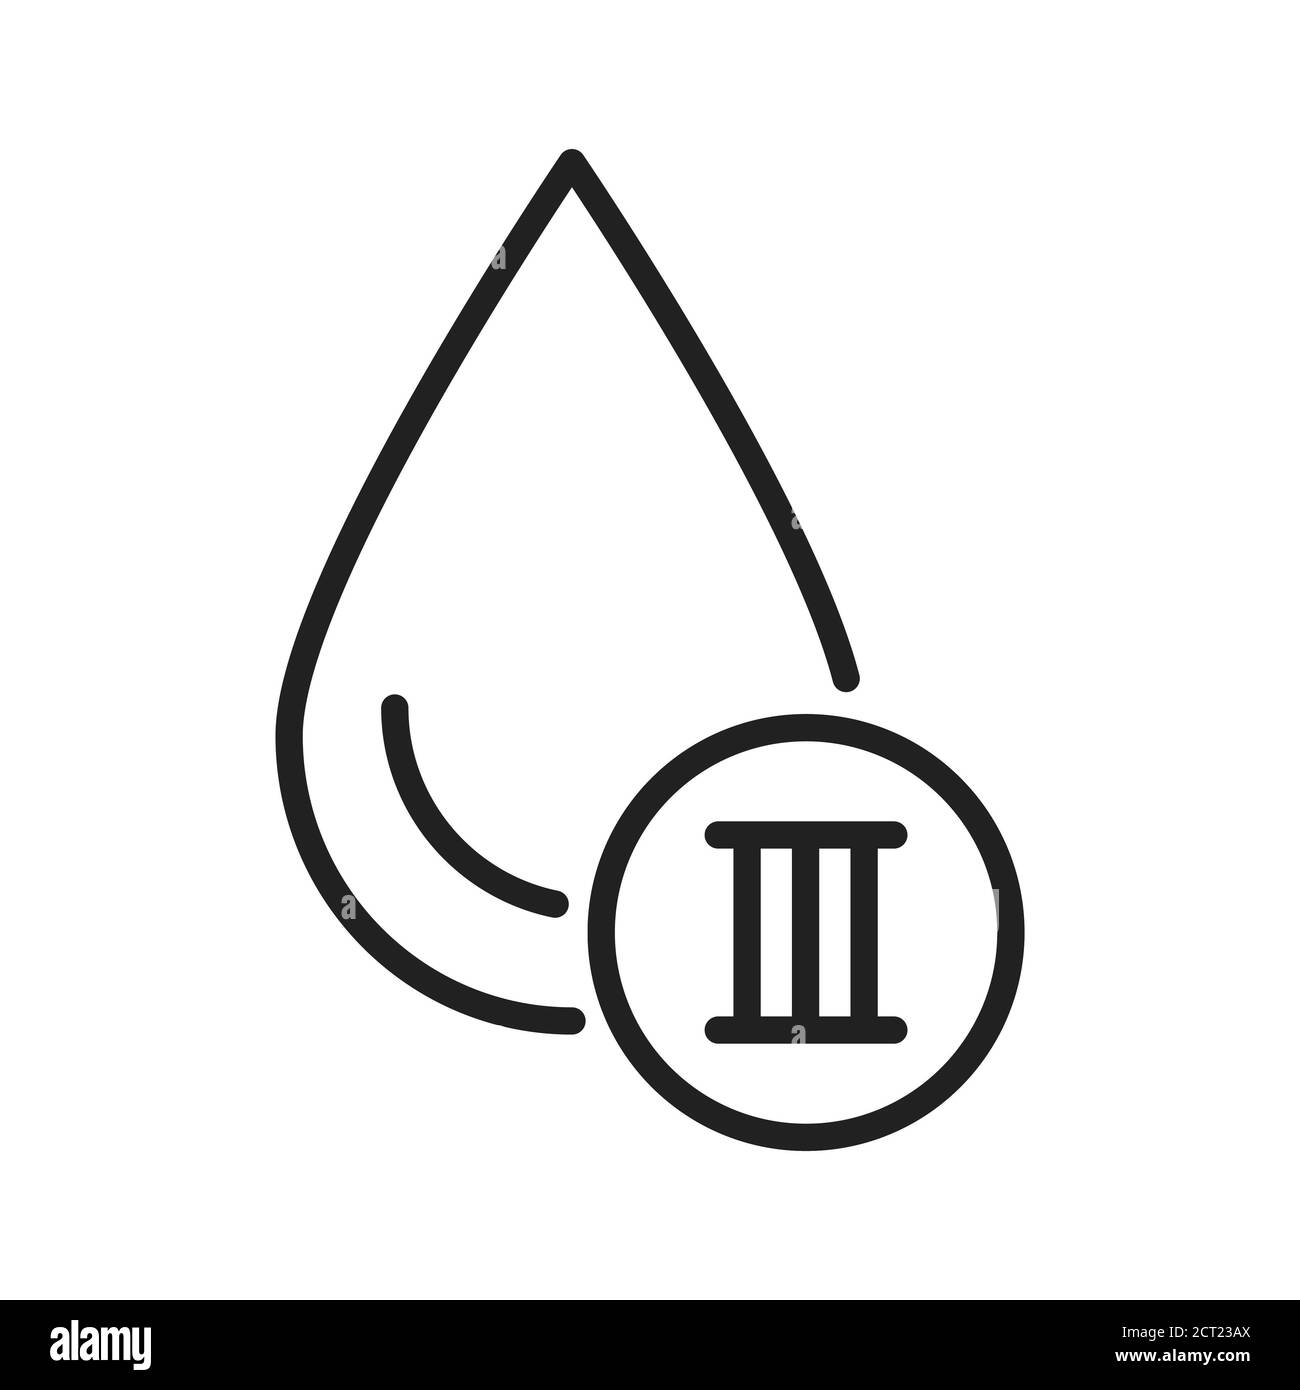 3 blood group black line icon. Donation, charity concept. Blood banking transfusion. Pictogram for web, mobile app, promo. UI UX design element Stock Photo